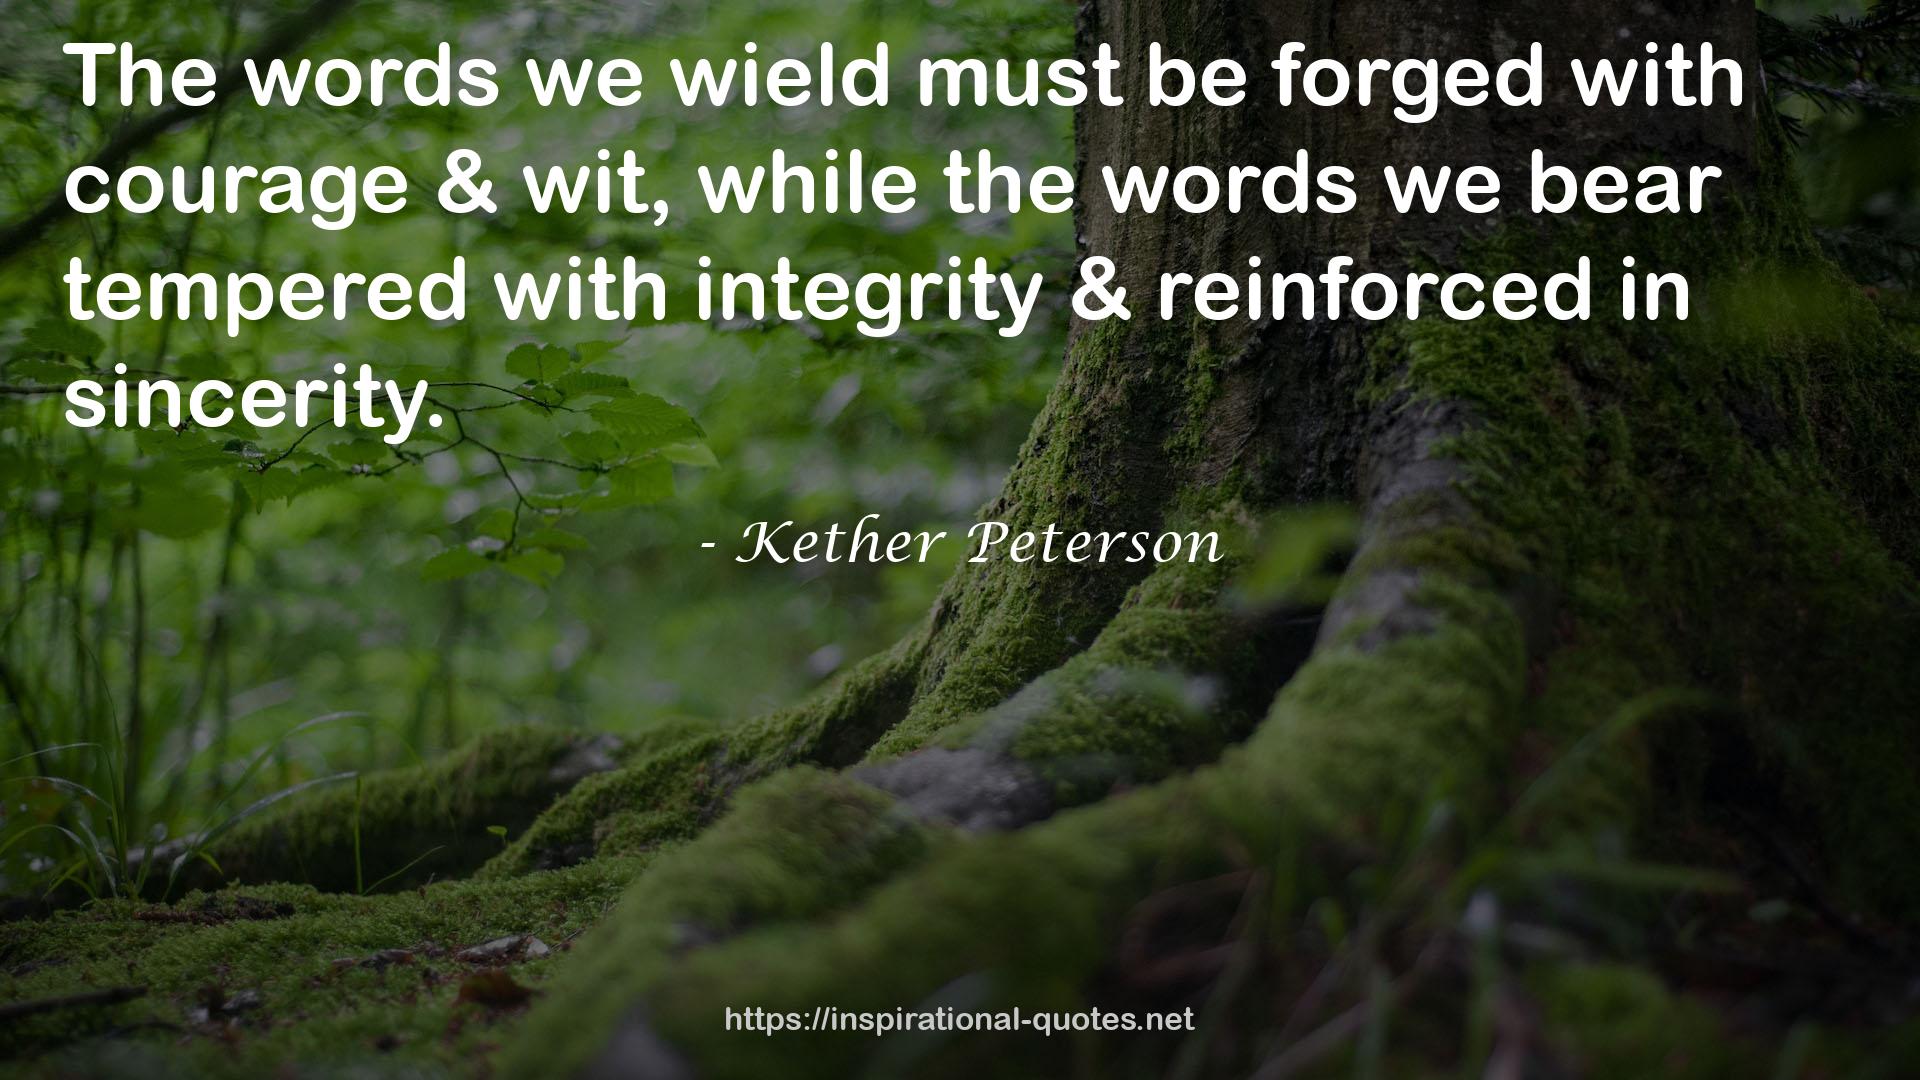 Kether Peterson QUOTES